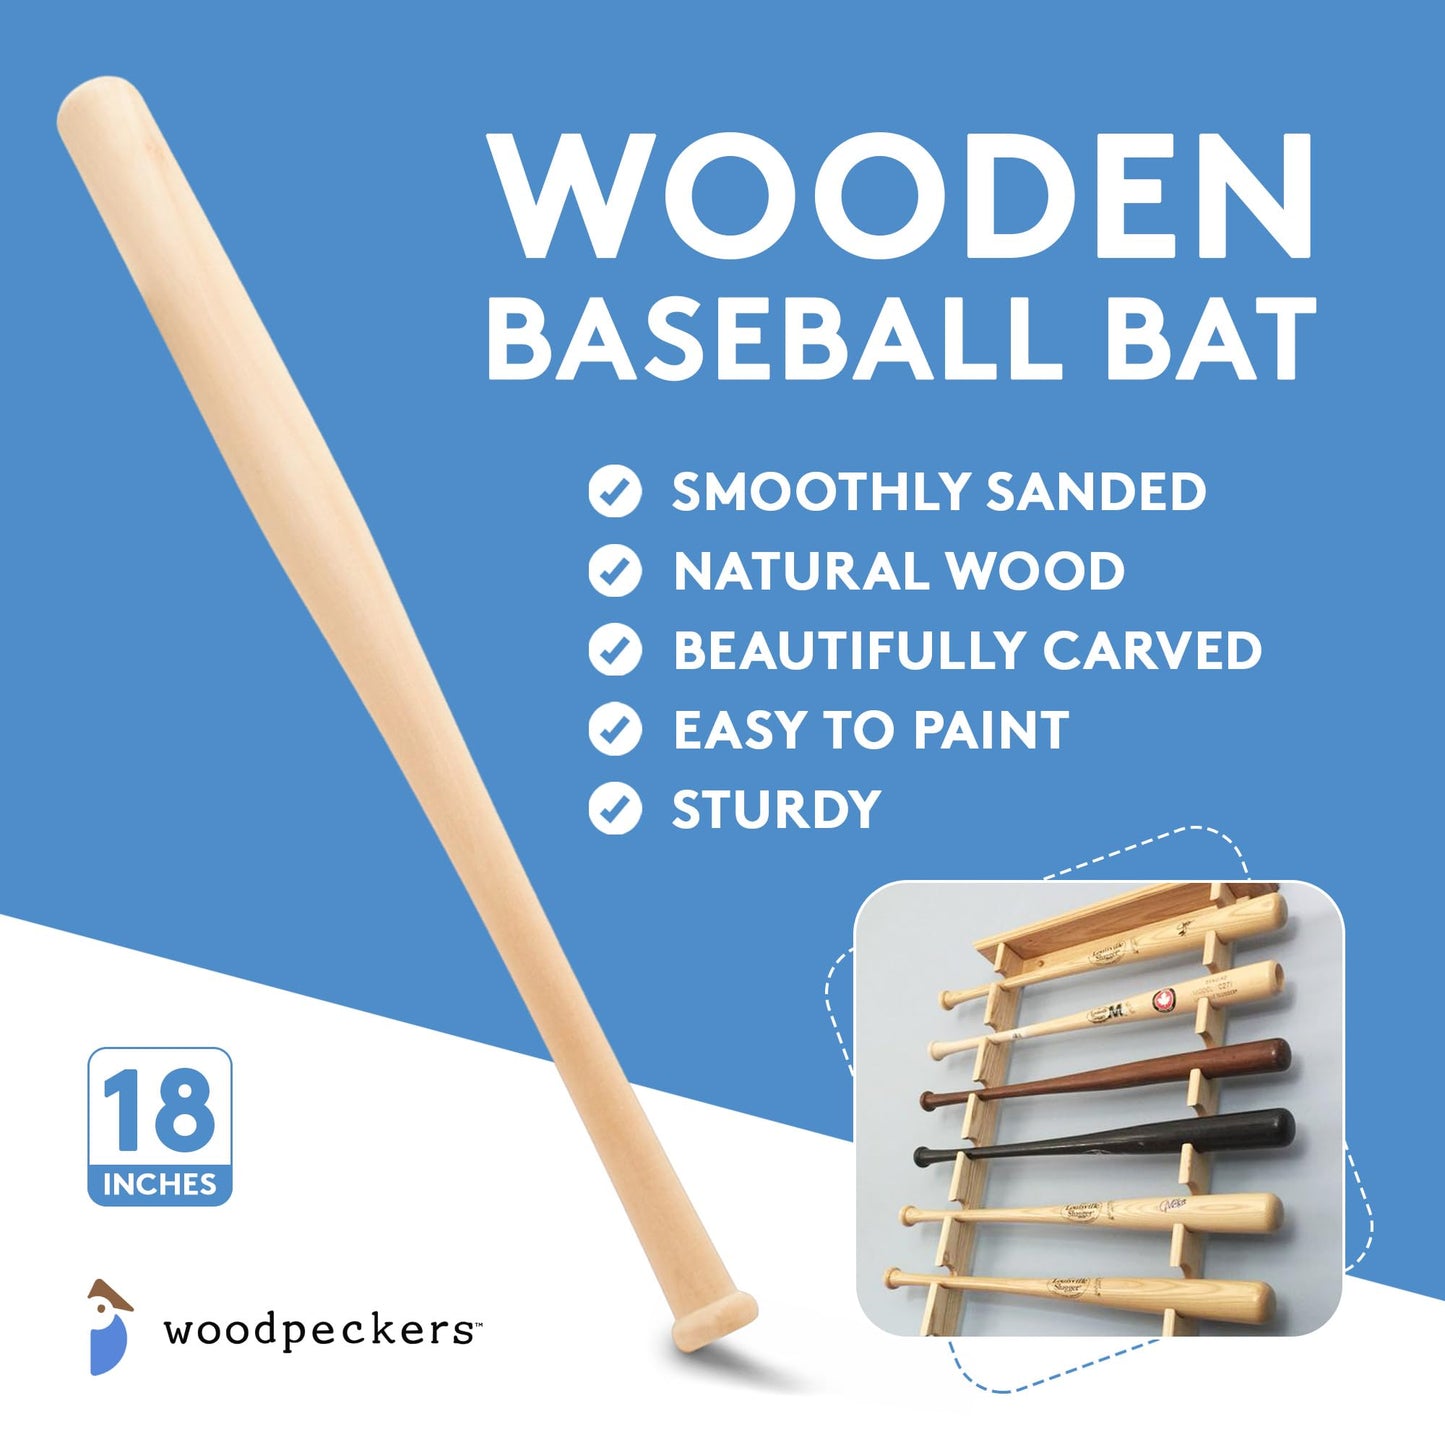 Wood Baseball bat 18 Inch Pack of 2 Unfinished Mini Wood Baseball Bat, Small Bat, Party Decor, Bedroom, Crafts, by Woodpeckers